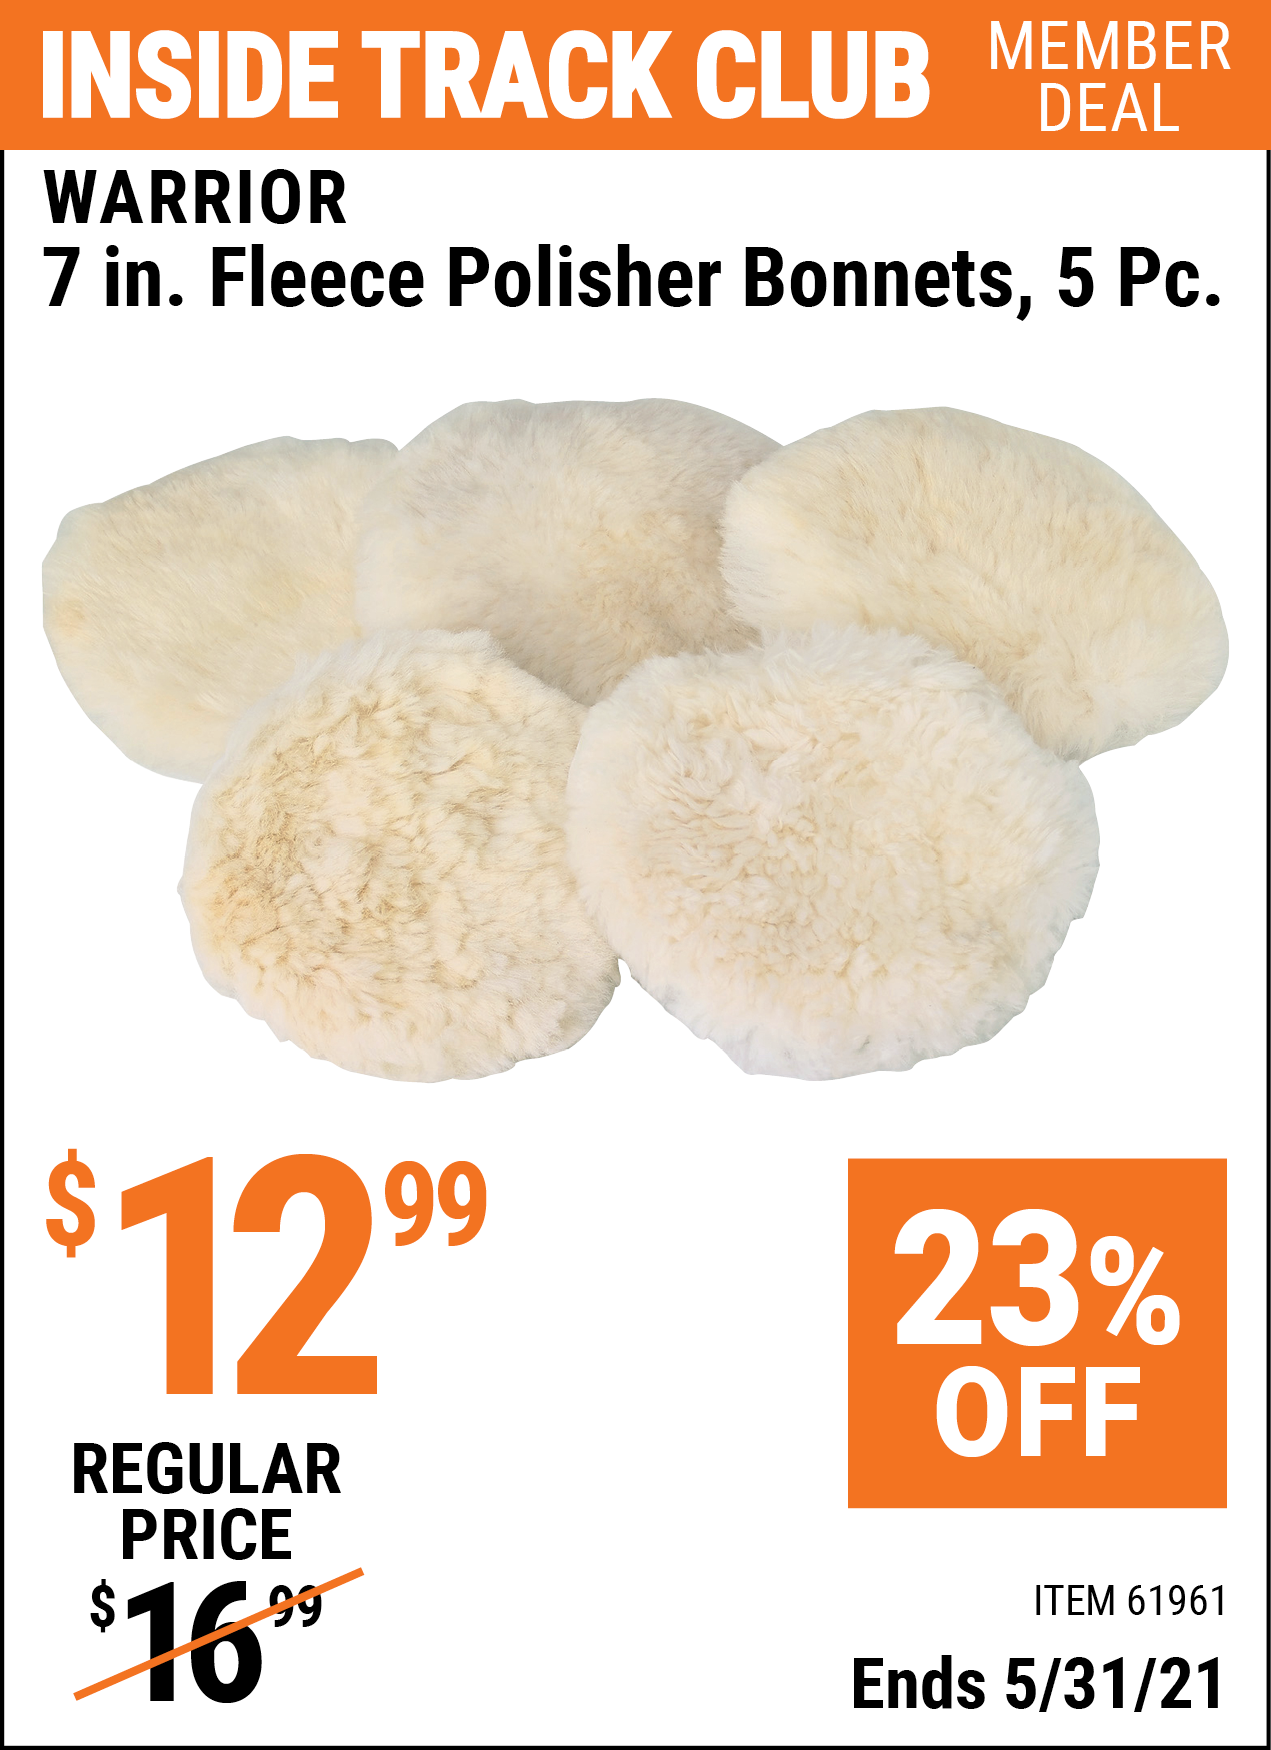 Inside Track Club members can buy the WARRIOR 7 In. Fleece Polisher Bonnets 5 Pc. (Item 61961) for $12.99, valid through 5/31/2021.